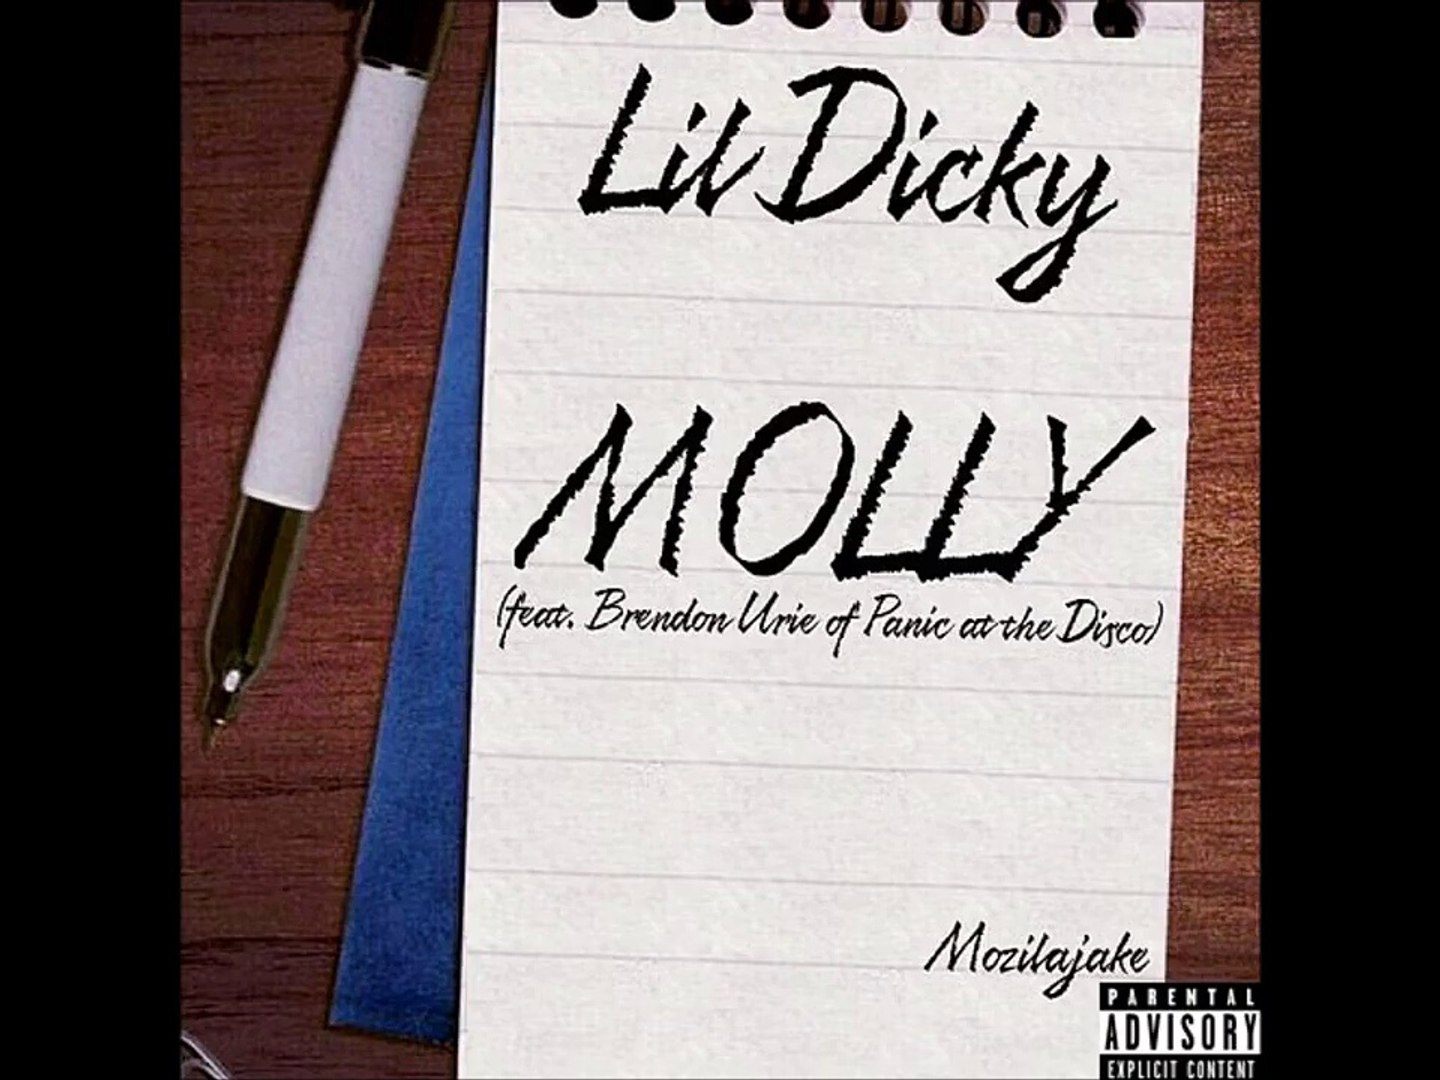 Lil Dicky - Molly (feat. Brendon Urie of Panic the Disco) [Mozilajake Artwork] video Dailymotion